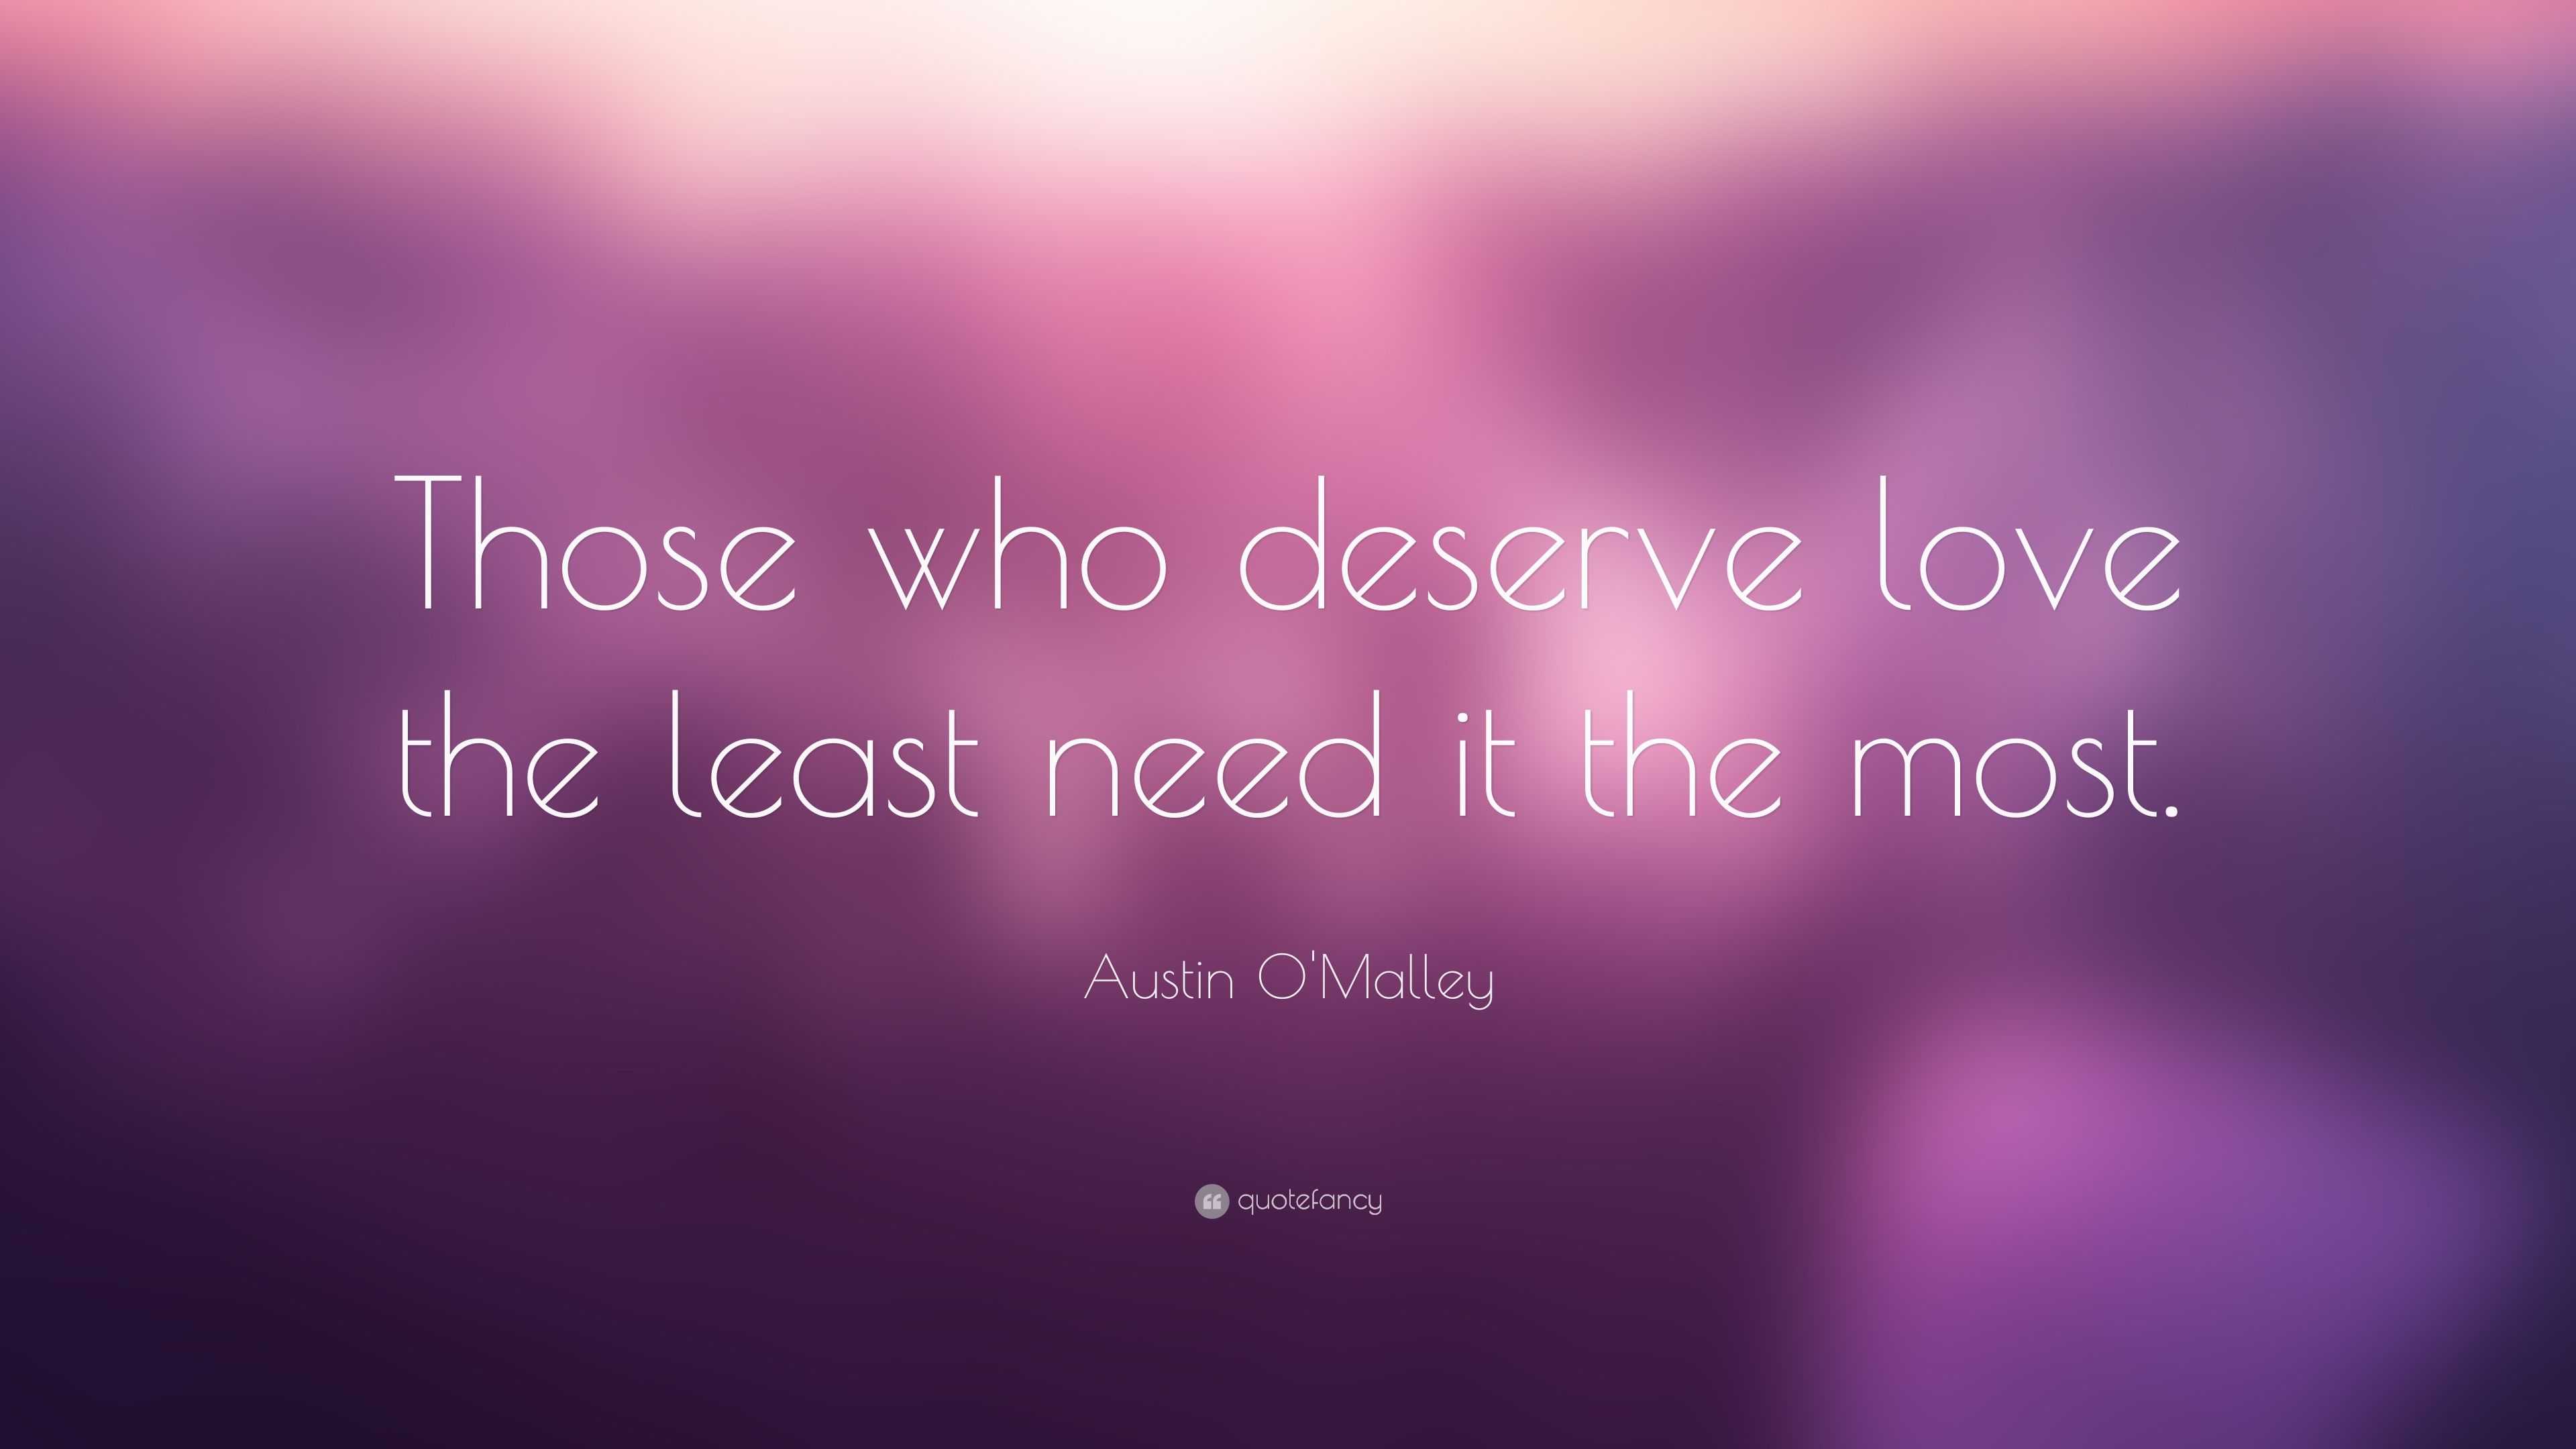 Austin O'Malley Quote: “Those who deserve love the least need it the most.”